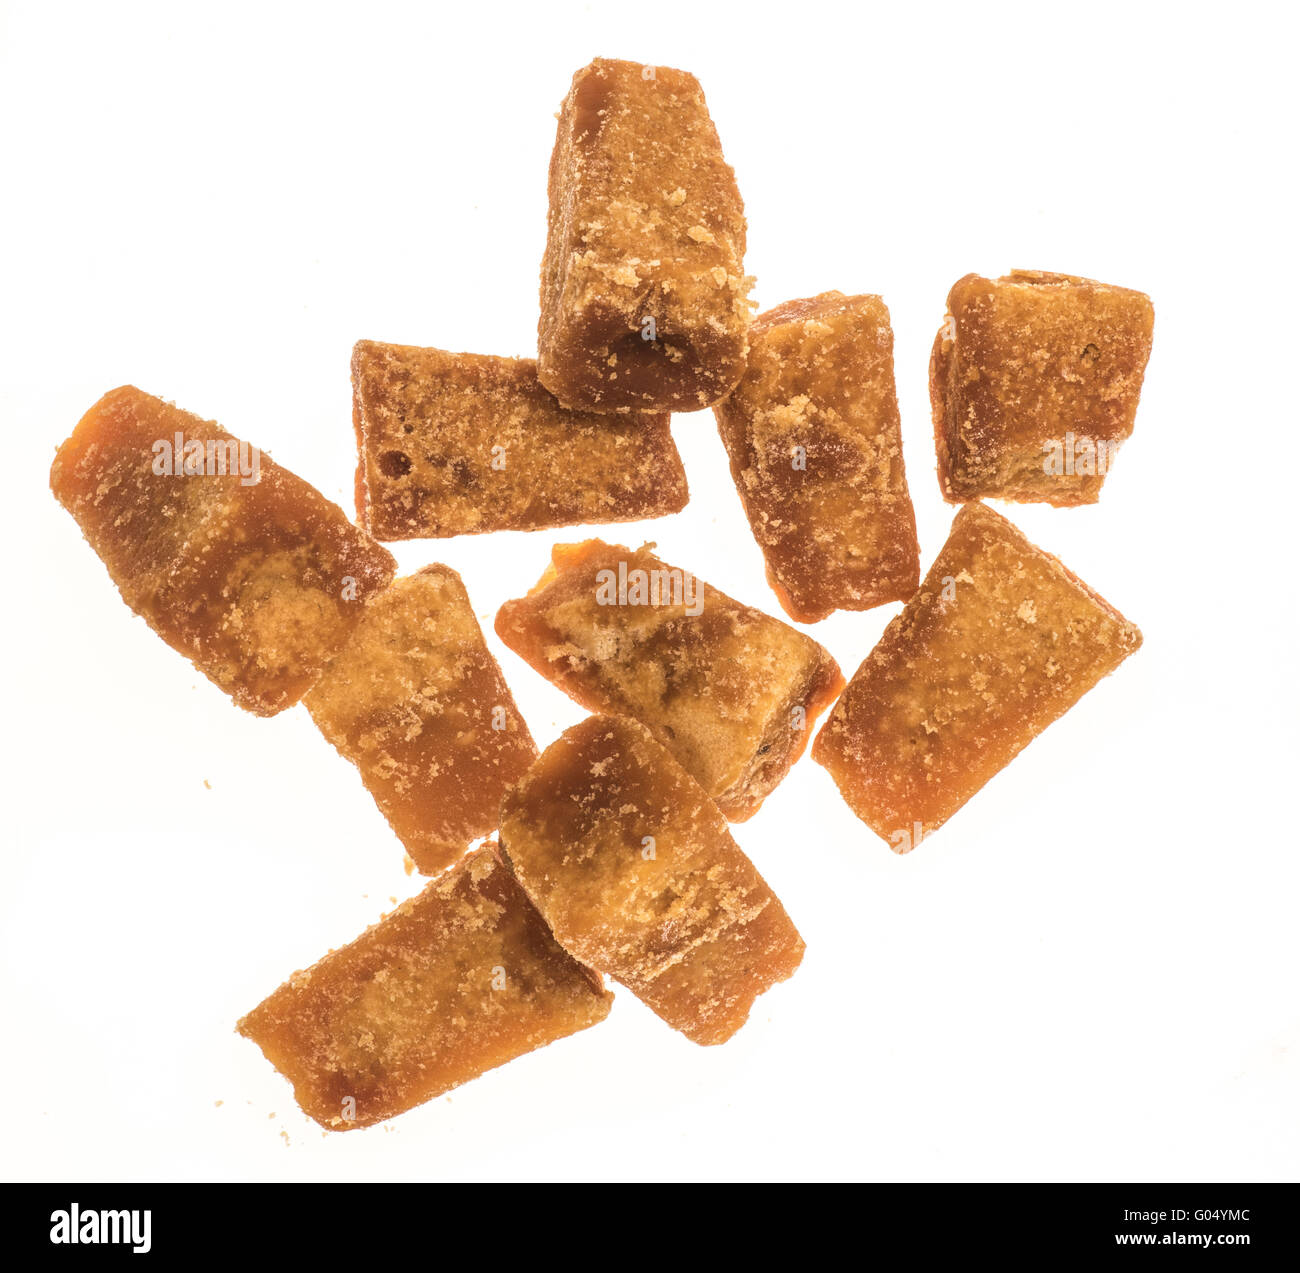 Rough lumps of jaggery - sugar used in Indian cooking Stock Photo